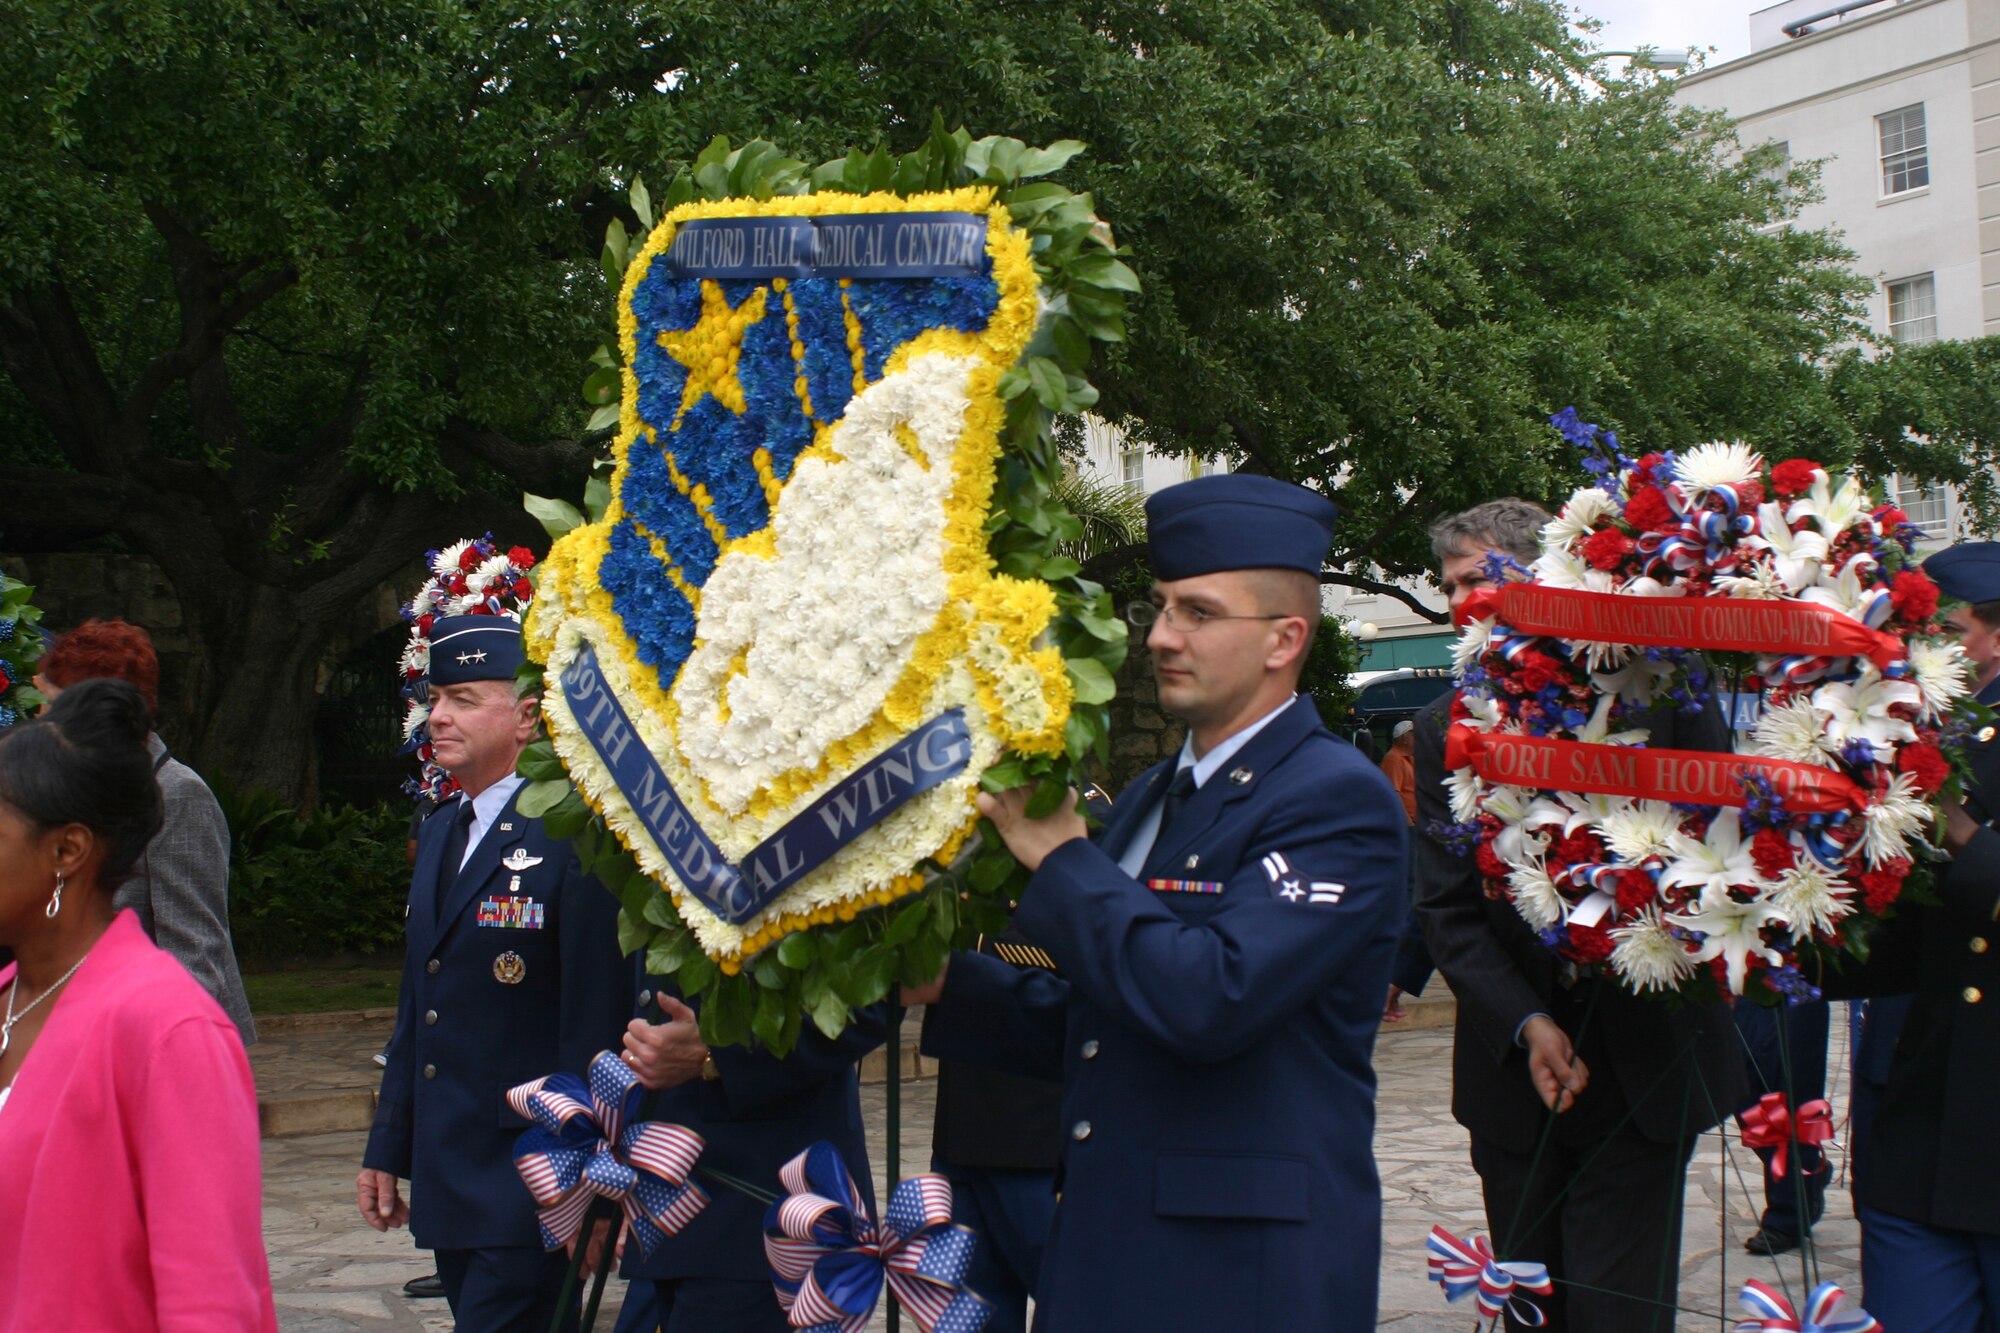 Maj. Gen. Tom Travis, 59th Medical Wing commander, (left) and Senior Airman Romulus Kocsis, 59th Dental Support Squadron, (right) march in the Pilgrimage to the Alamo carrying the 59th Medical Wing wreath on April 19. Not pictured is Chief Master Sgt. Richard Robinson, 59th MDW command chief.  The Pilgrimage, a memorial tribute to the Alamo heroes, is one of many events the Medical Wing supports during Fiesta San Antonio. (U.S. Air Force photo/ Linda Frost)
